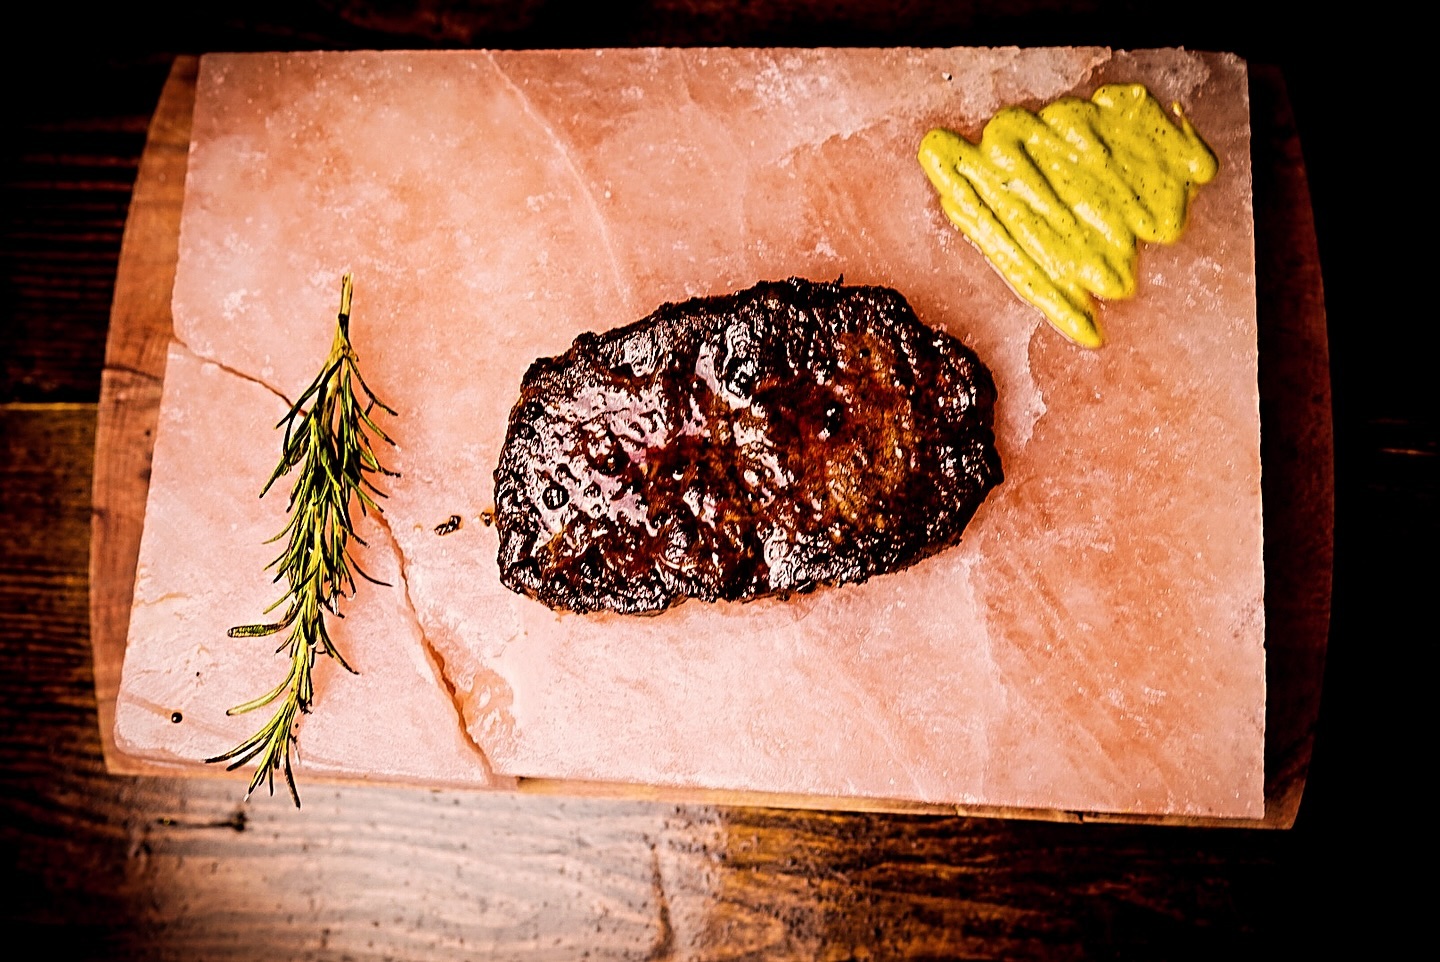 Grilled steak on a pink salt block with a sprig of rosemary and a dollop of mustard on the side. the dish is presented on a dark wooden table.